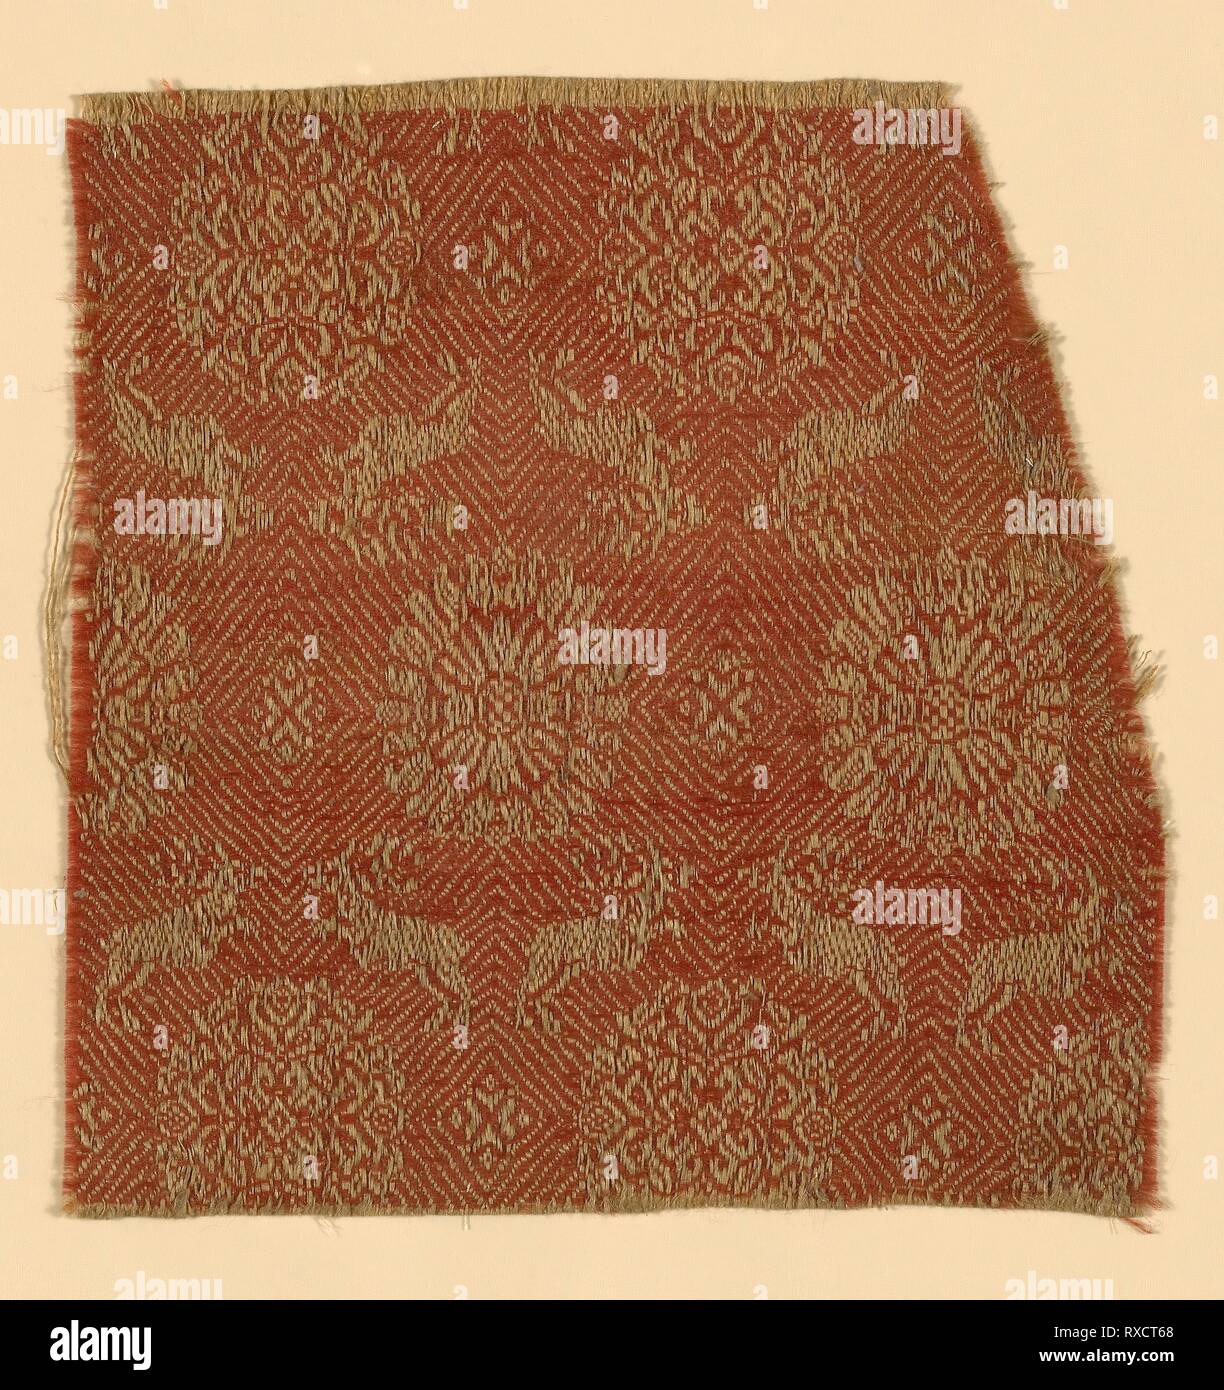 Fragment. Europe. Date: 1601-1700. Dimensions: 19.5 × 18.9 cm (7 3/4 × 7 1/2 in.). Linen and wool, weft-float faced point twill weave self-patterned by main warp floats. Origin: Europe. Museum: The Chicago Art Institute. Stock Photo